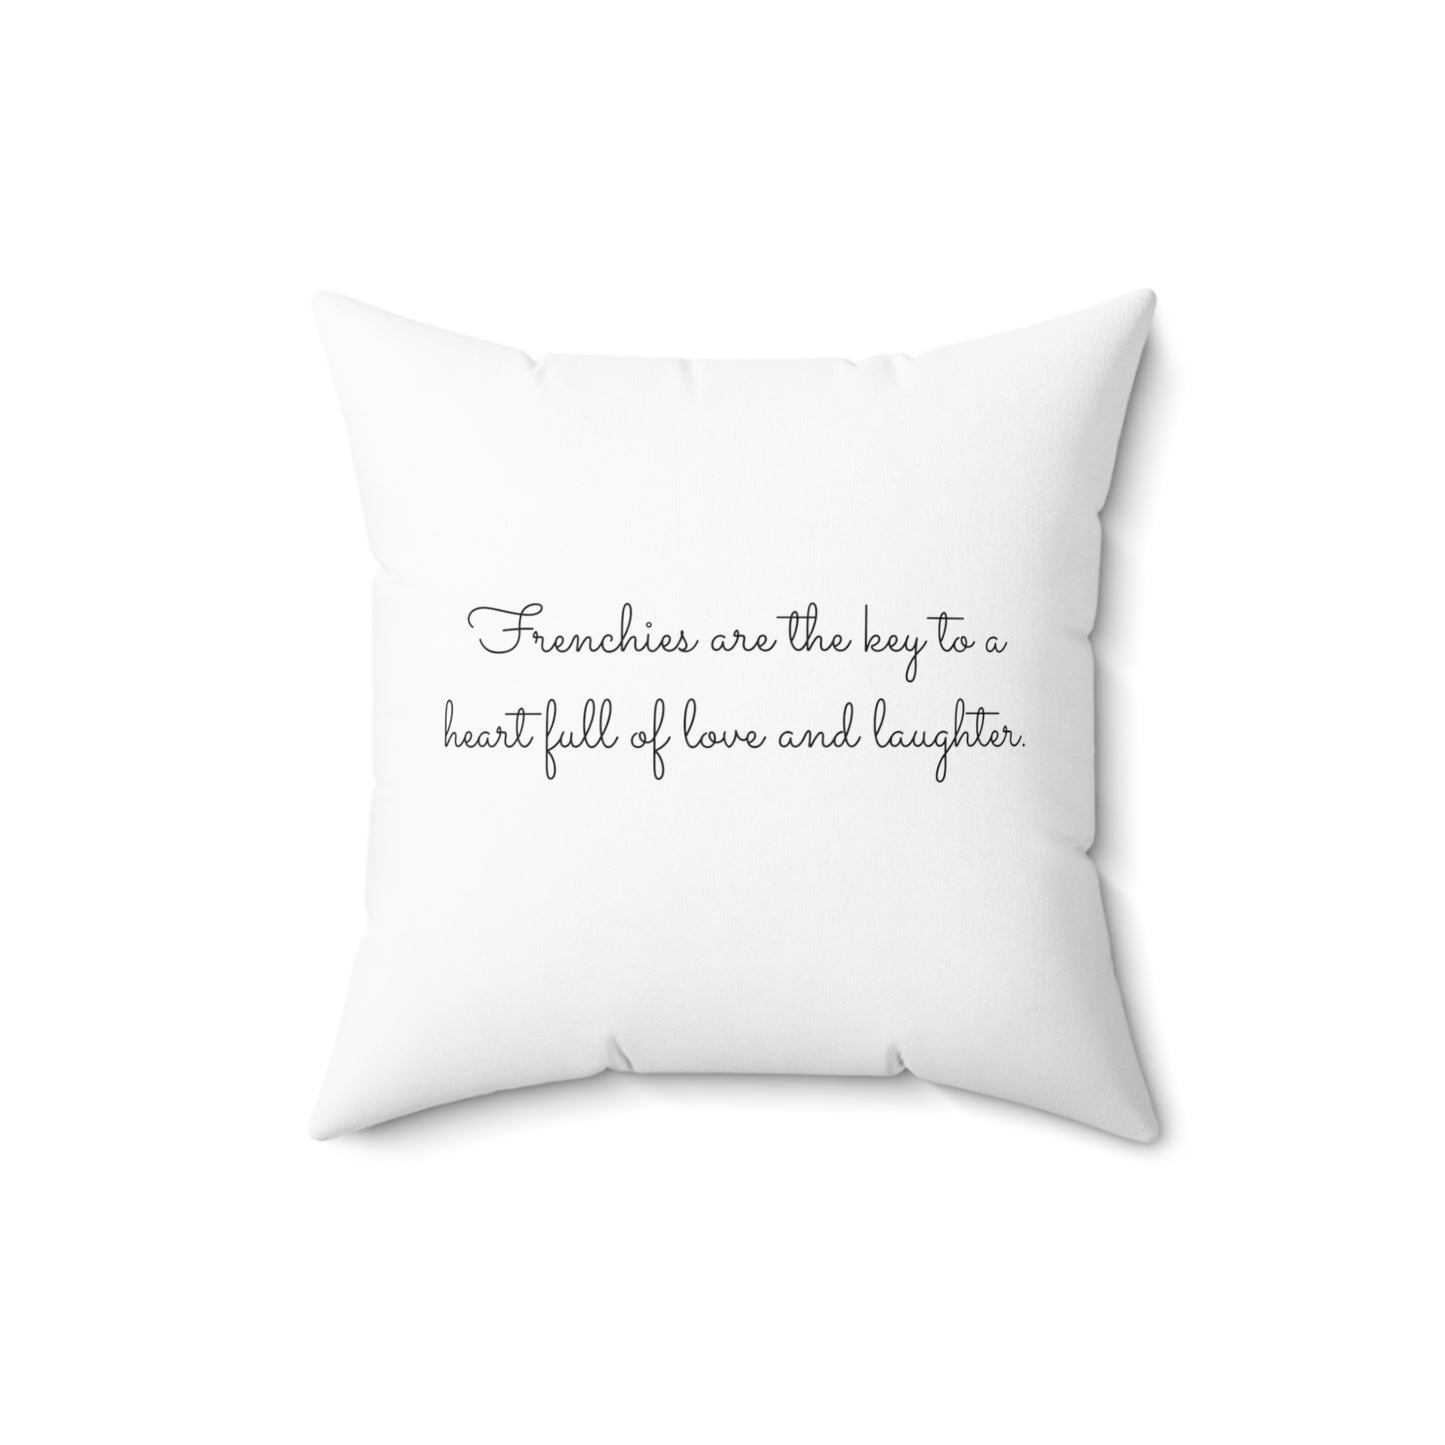 Life is better with a Frenchie by your side - Spun Polyester Square Pillow